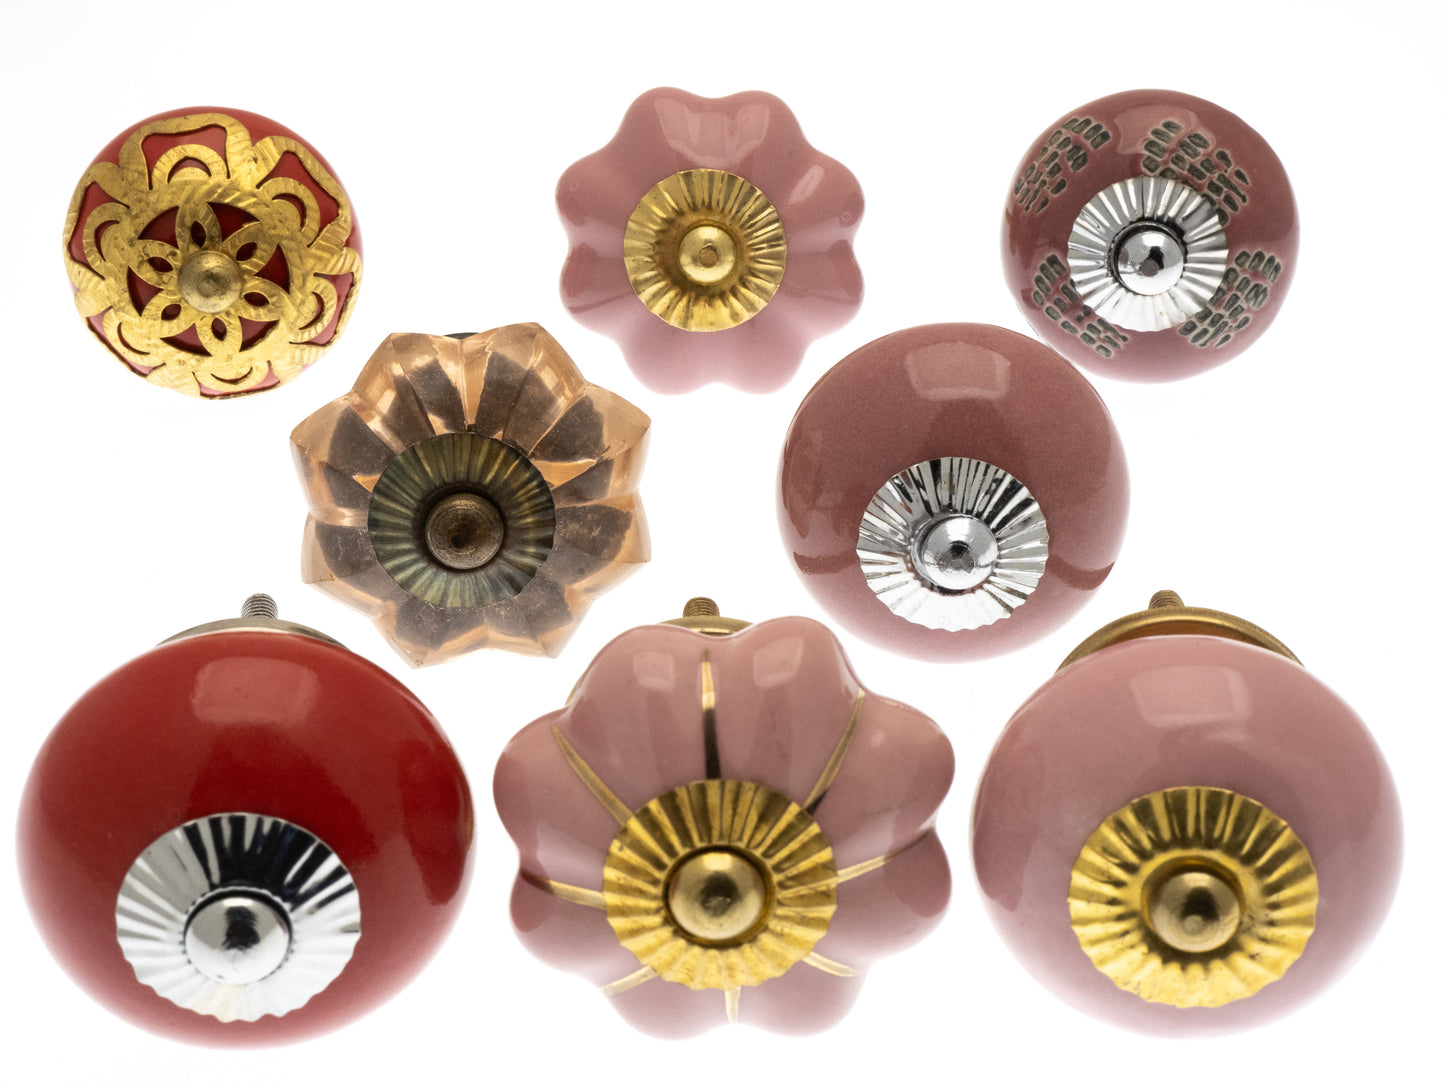 Ceramic Door Knobs - 8 Red & Pink Glass and Brass